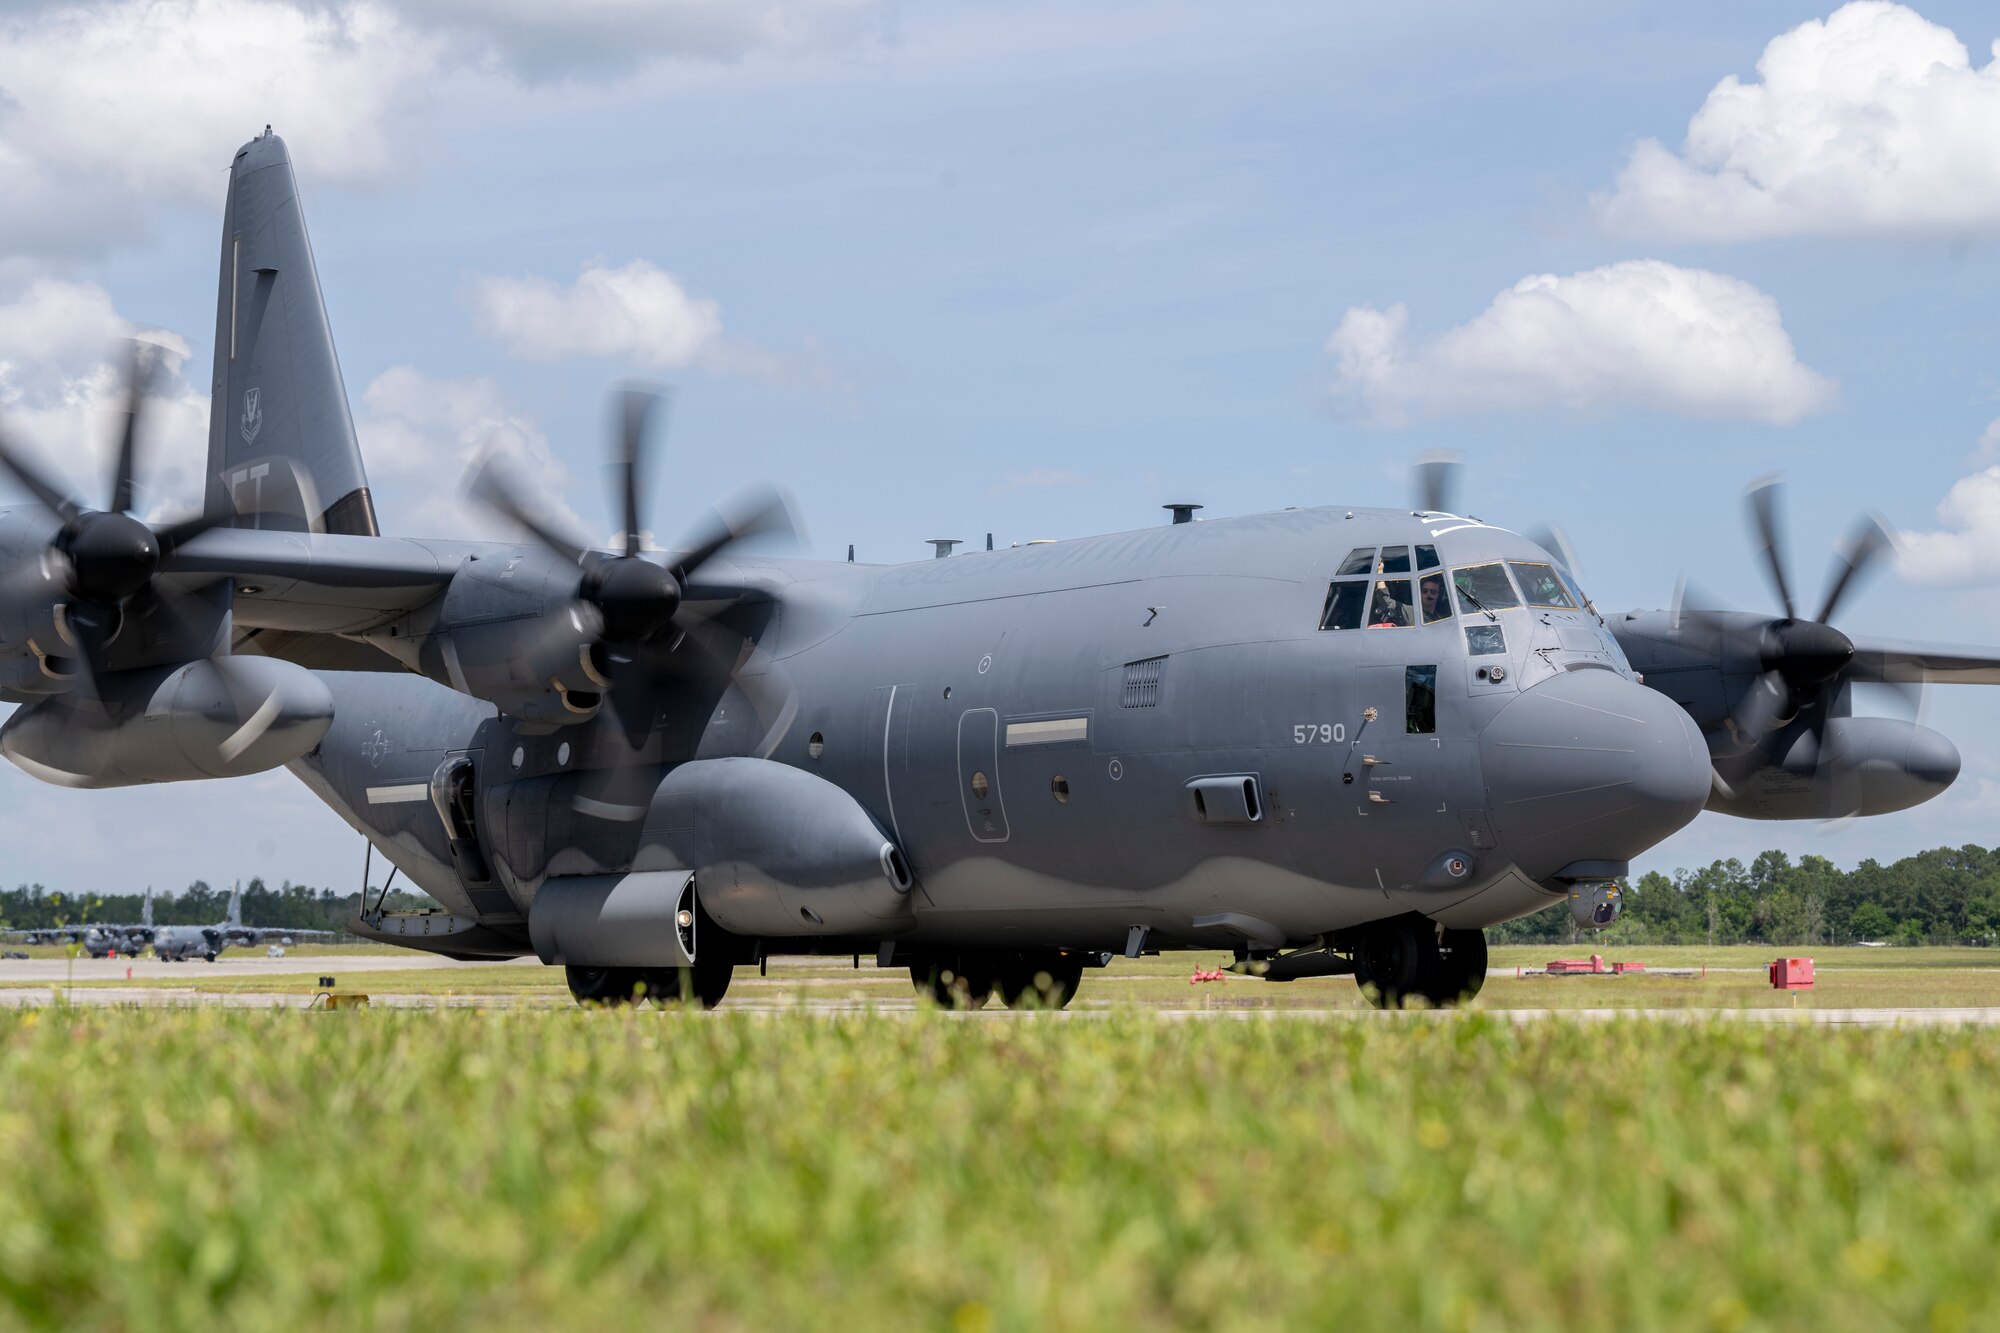 An HC-130J Combat King II arrives to the Deployment Control Center at Moody Air Force Base, Georgia, April 10, 2024. Passenger and cargo were loaded in support of Exercise Ready Tiger 24-1. Ready Tiger 24-1 is a readiness exercise demonstrating the 23rd Wing’s ability to plan, prepare and execute operations and maintenance to project air power in contested and dispersed locations, defending the United States’ interests and allies. (U.S. Air Force photo by Senior Airman Deanna Muir)